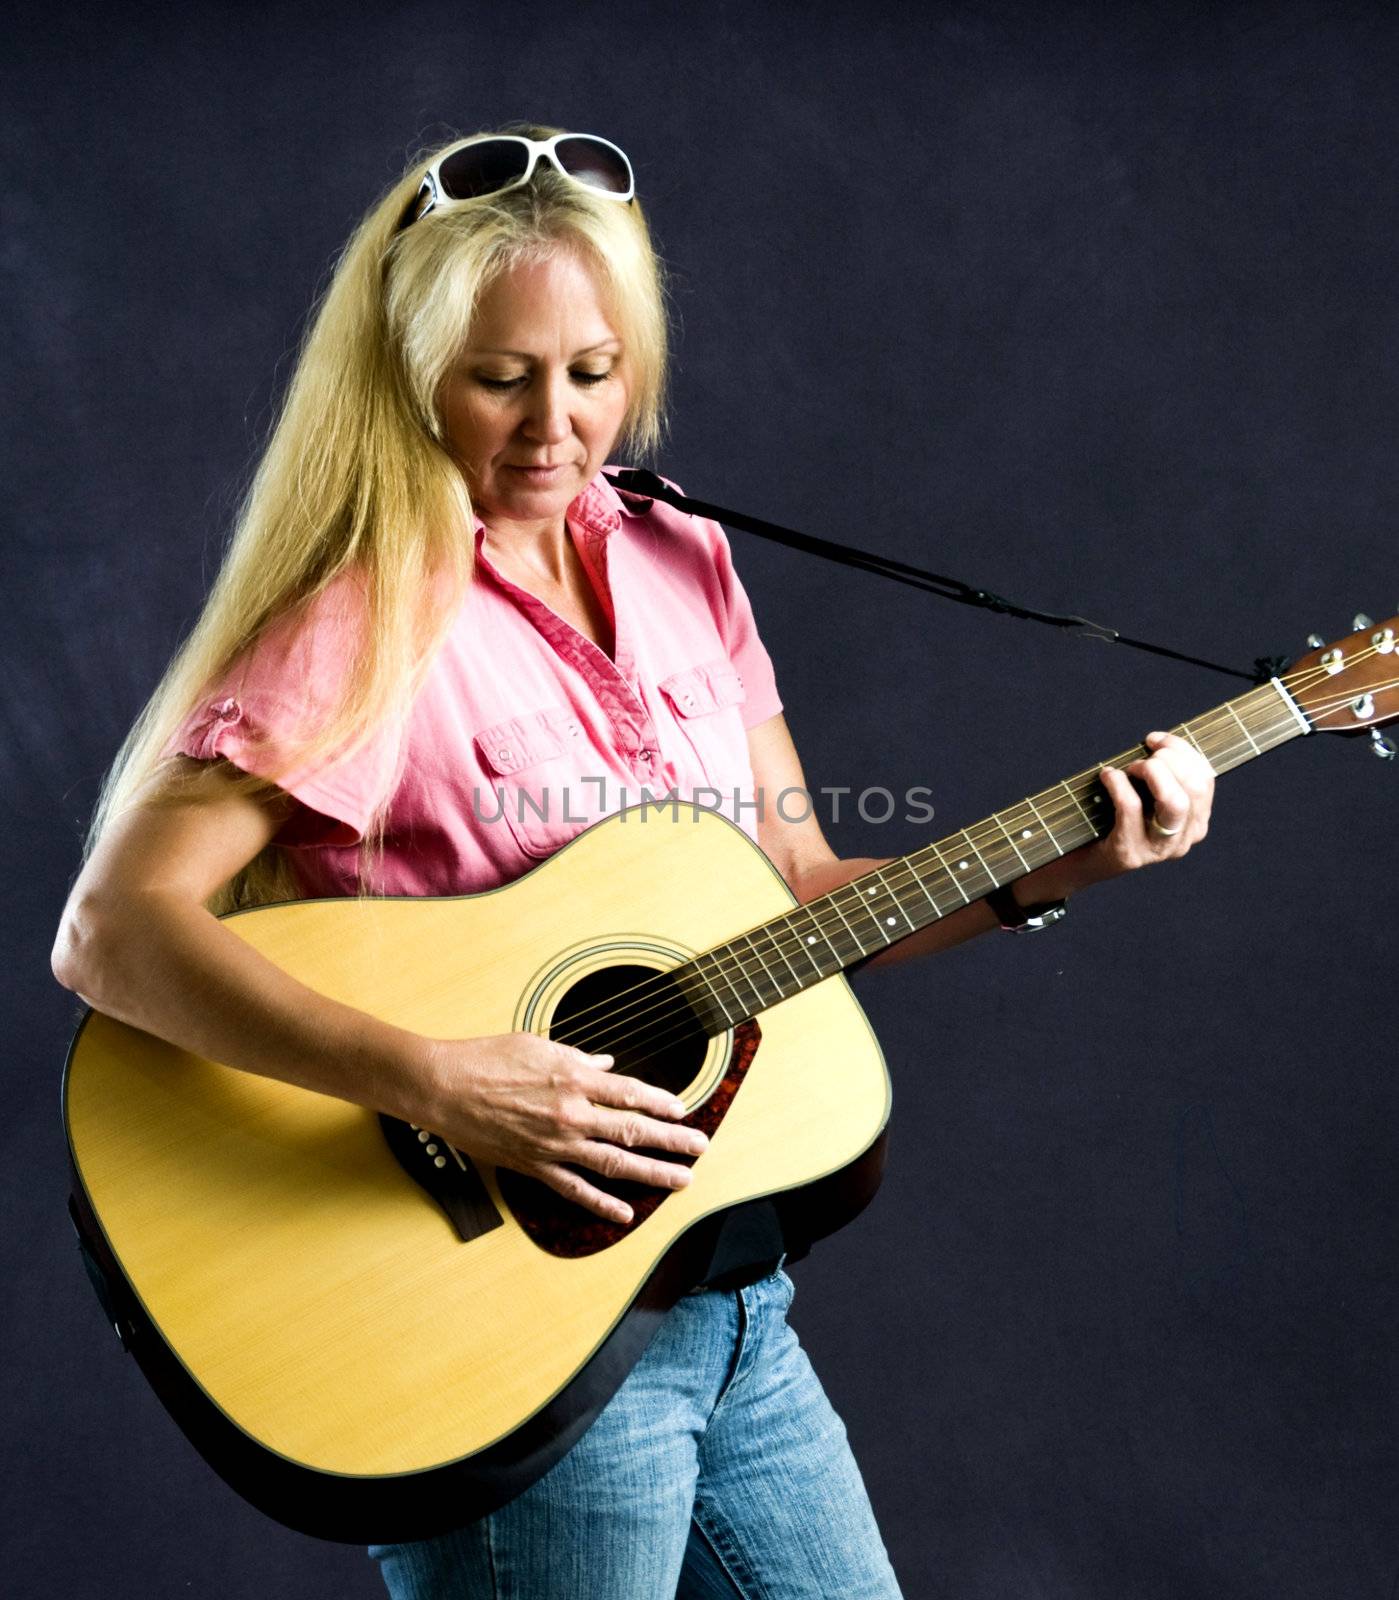 Pretty blonde woman playing guitar by rcarner